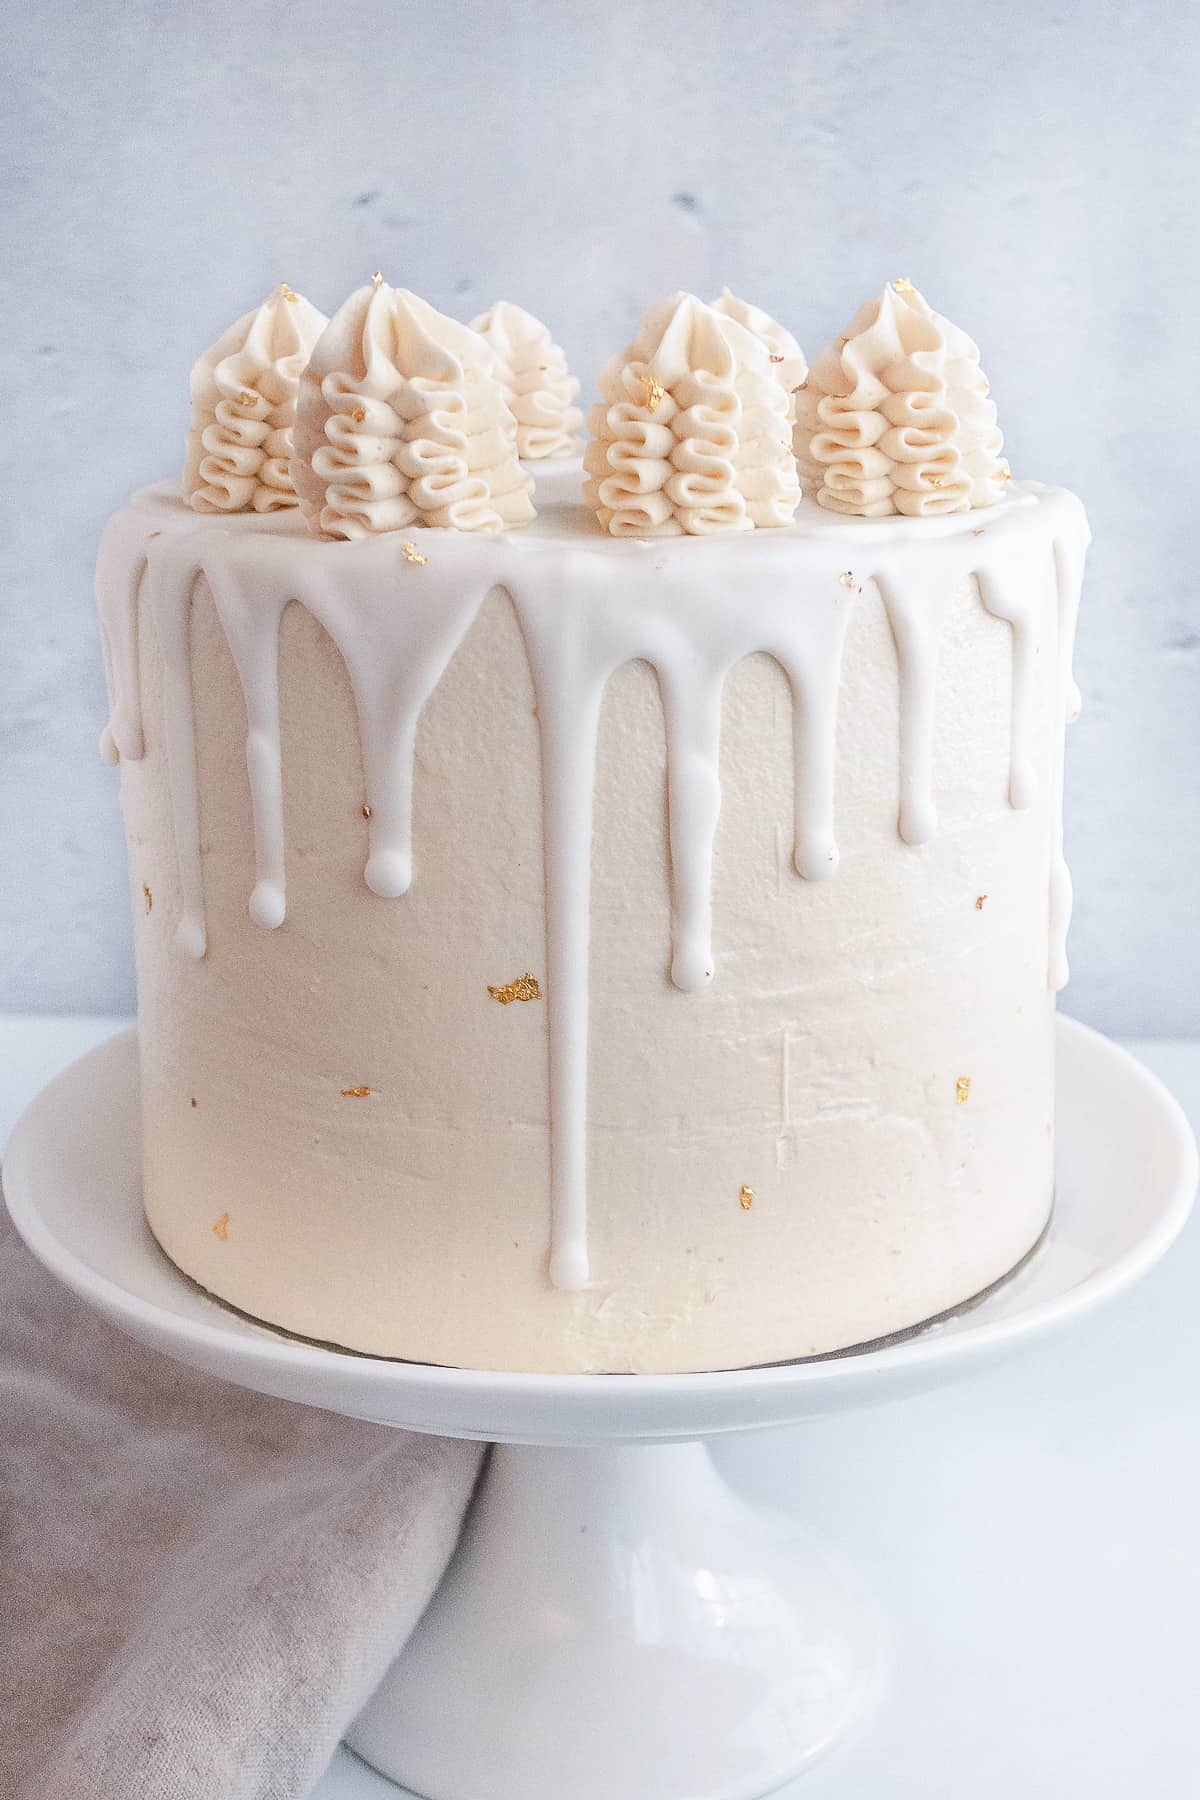 Vanilla cake with drips and piped frosting on a white cake stand